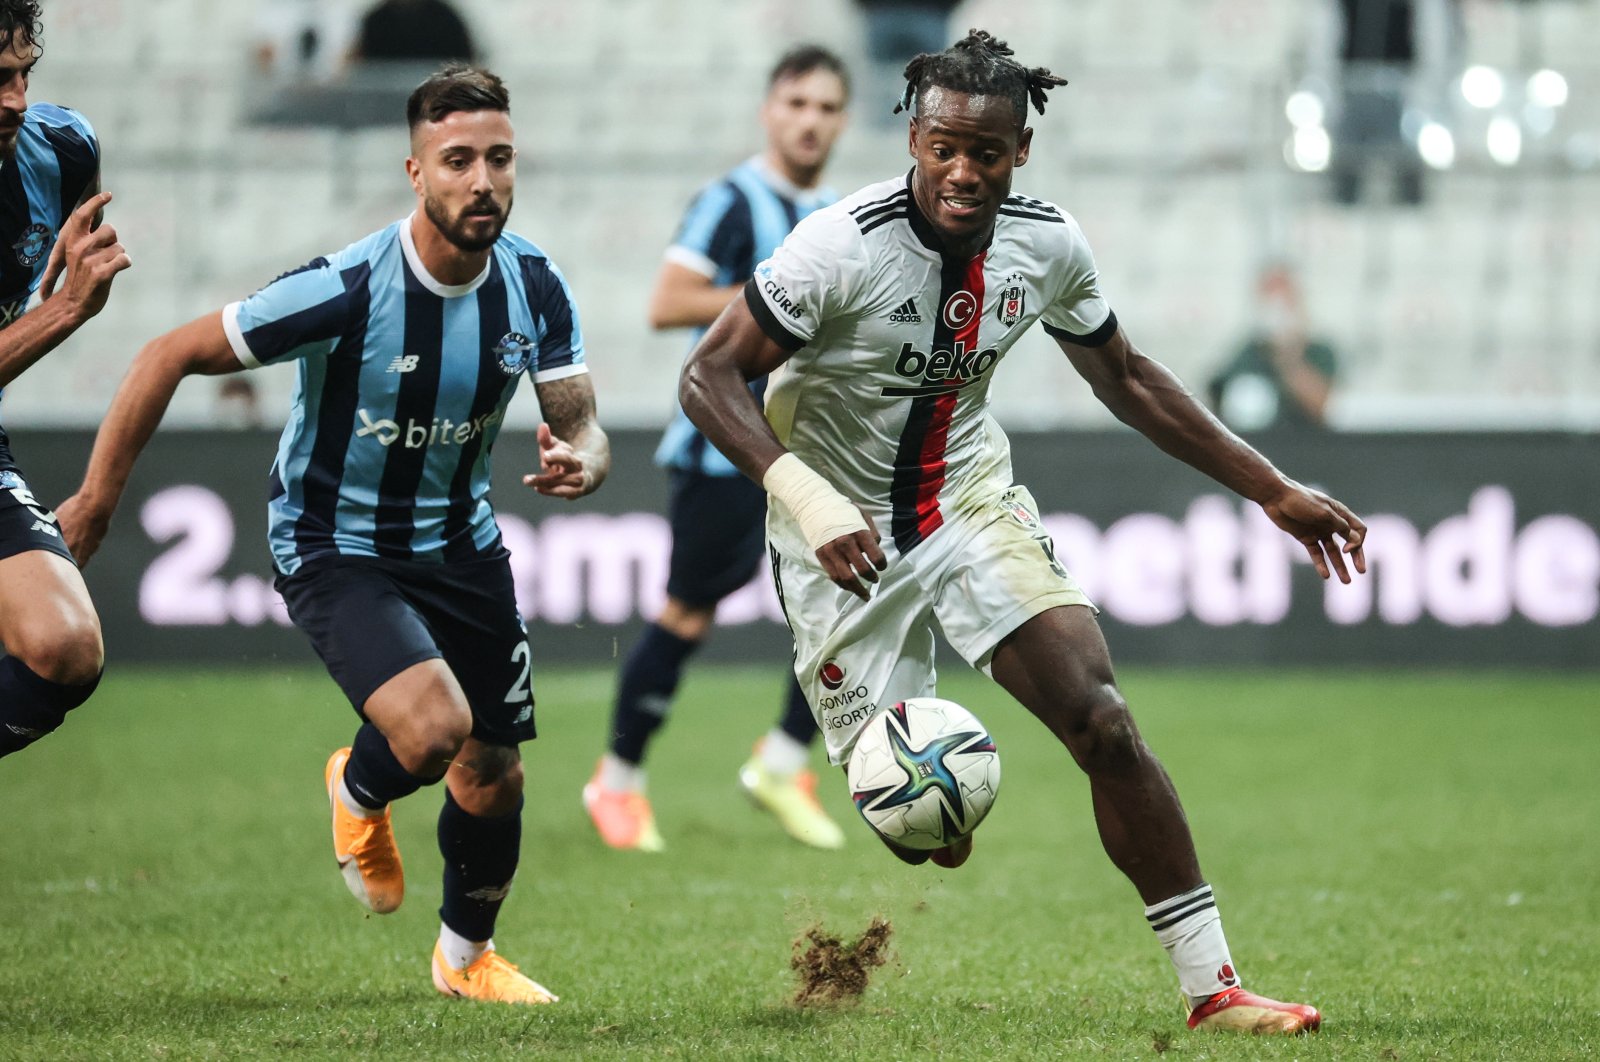 Beşiktaş's Michy Batshuayi (R) is seen in action with Adana Demirspor players in this photo taken on Sept. 21, 2021 at the Vodafone Park in Istanbul (AA Photo)